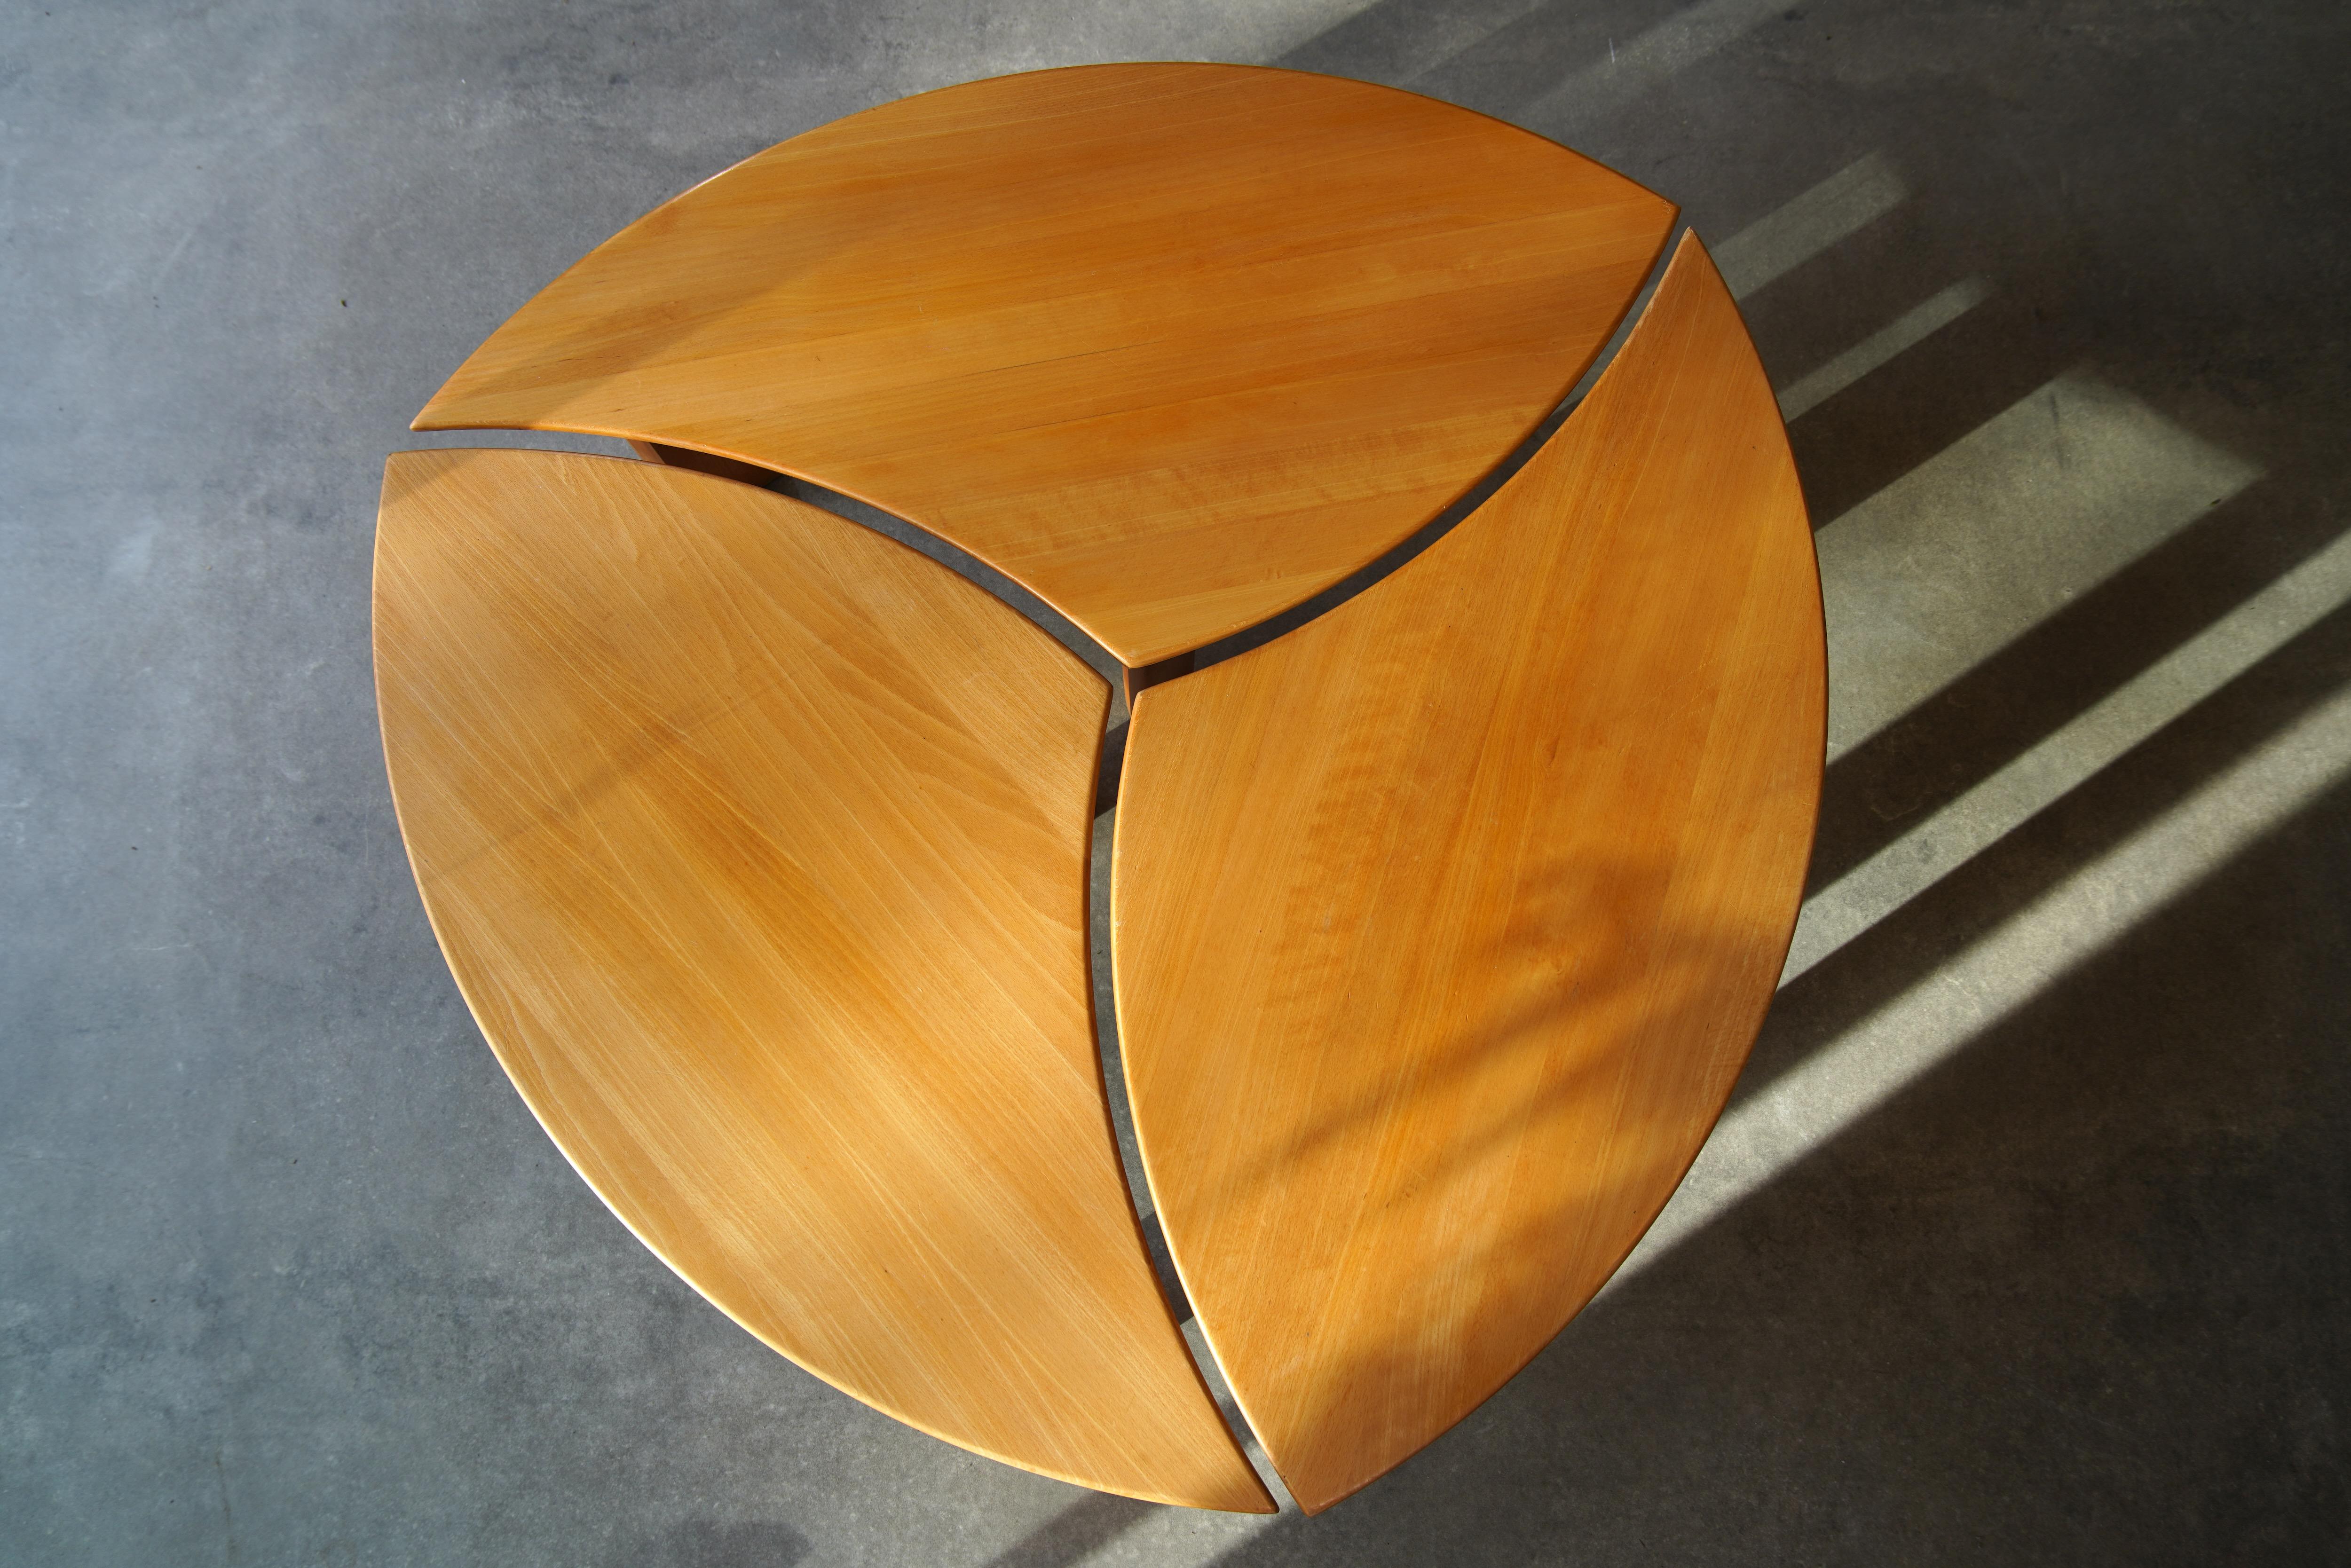 Pierre Chapo 'Petal' Coffee Table in Elm Wood for Seltz, France circa 1978 In Good Condition For Sale In Malibu, US